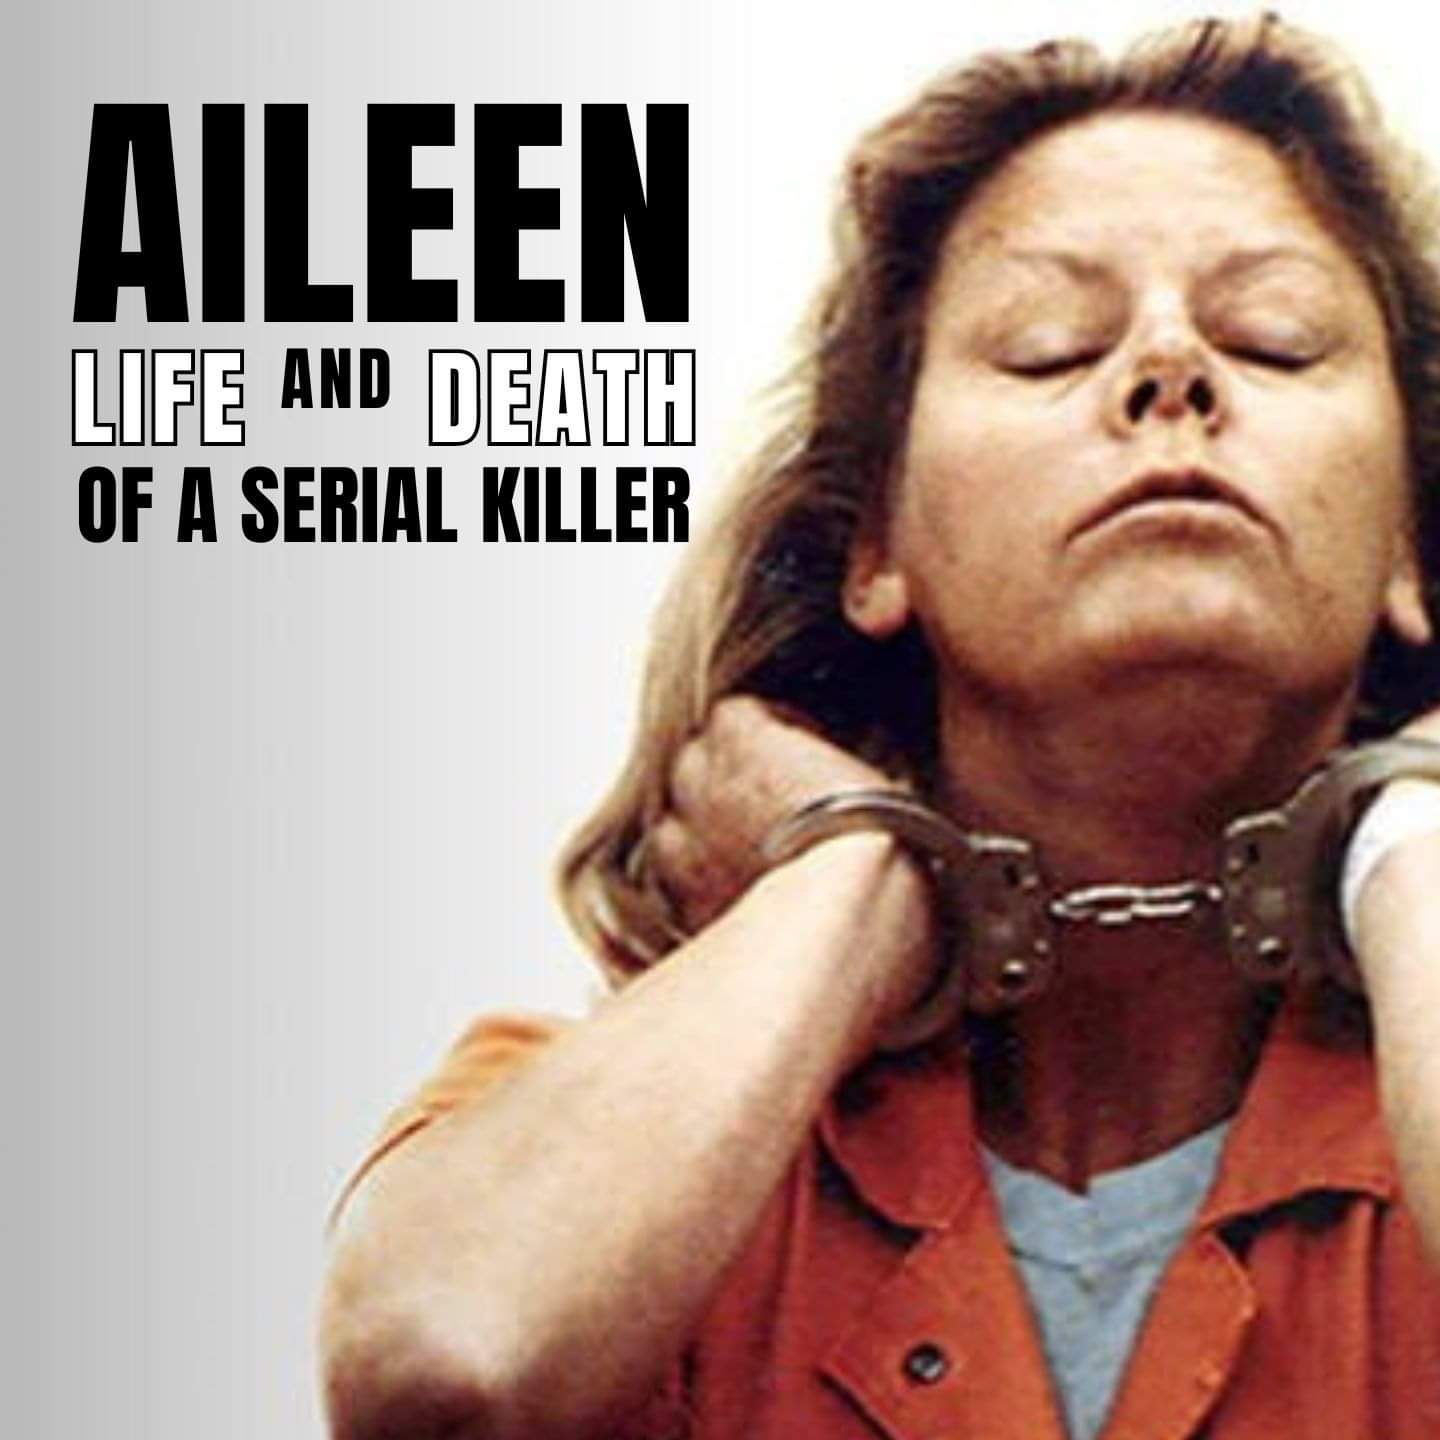 Case File 14: Life and Death of Woman Serial Killer Aileen Wuornos